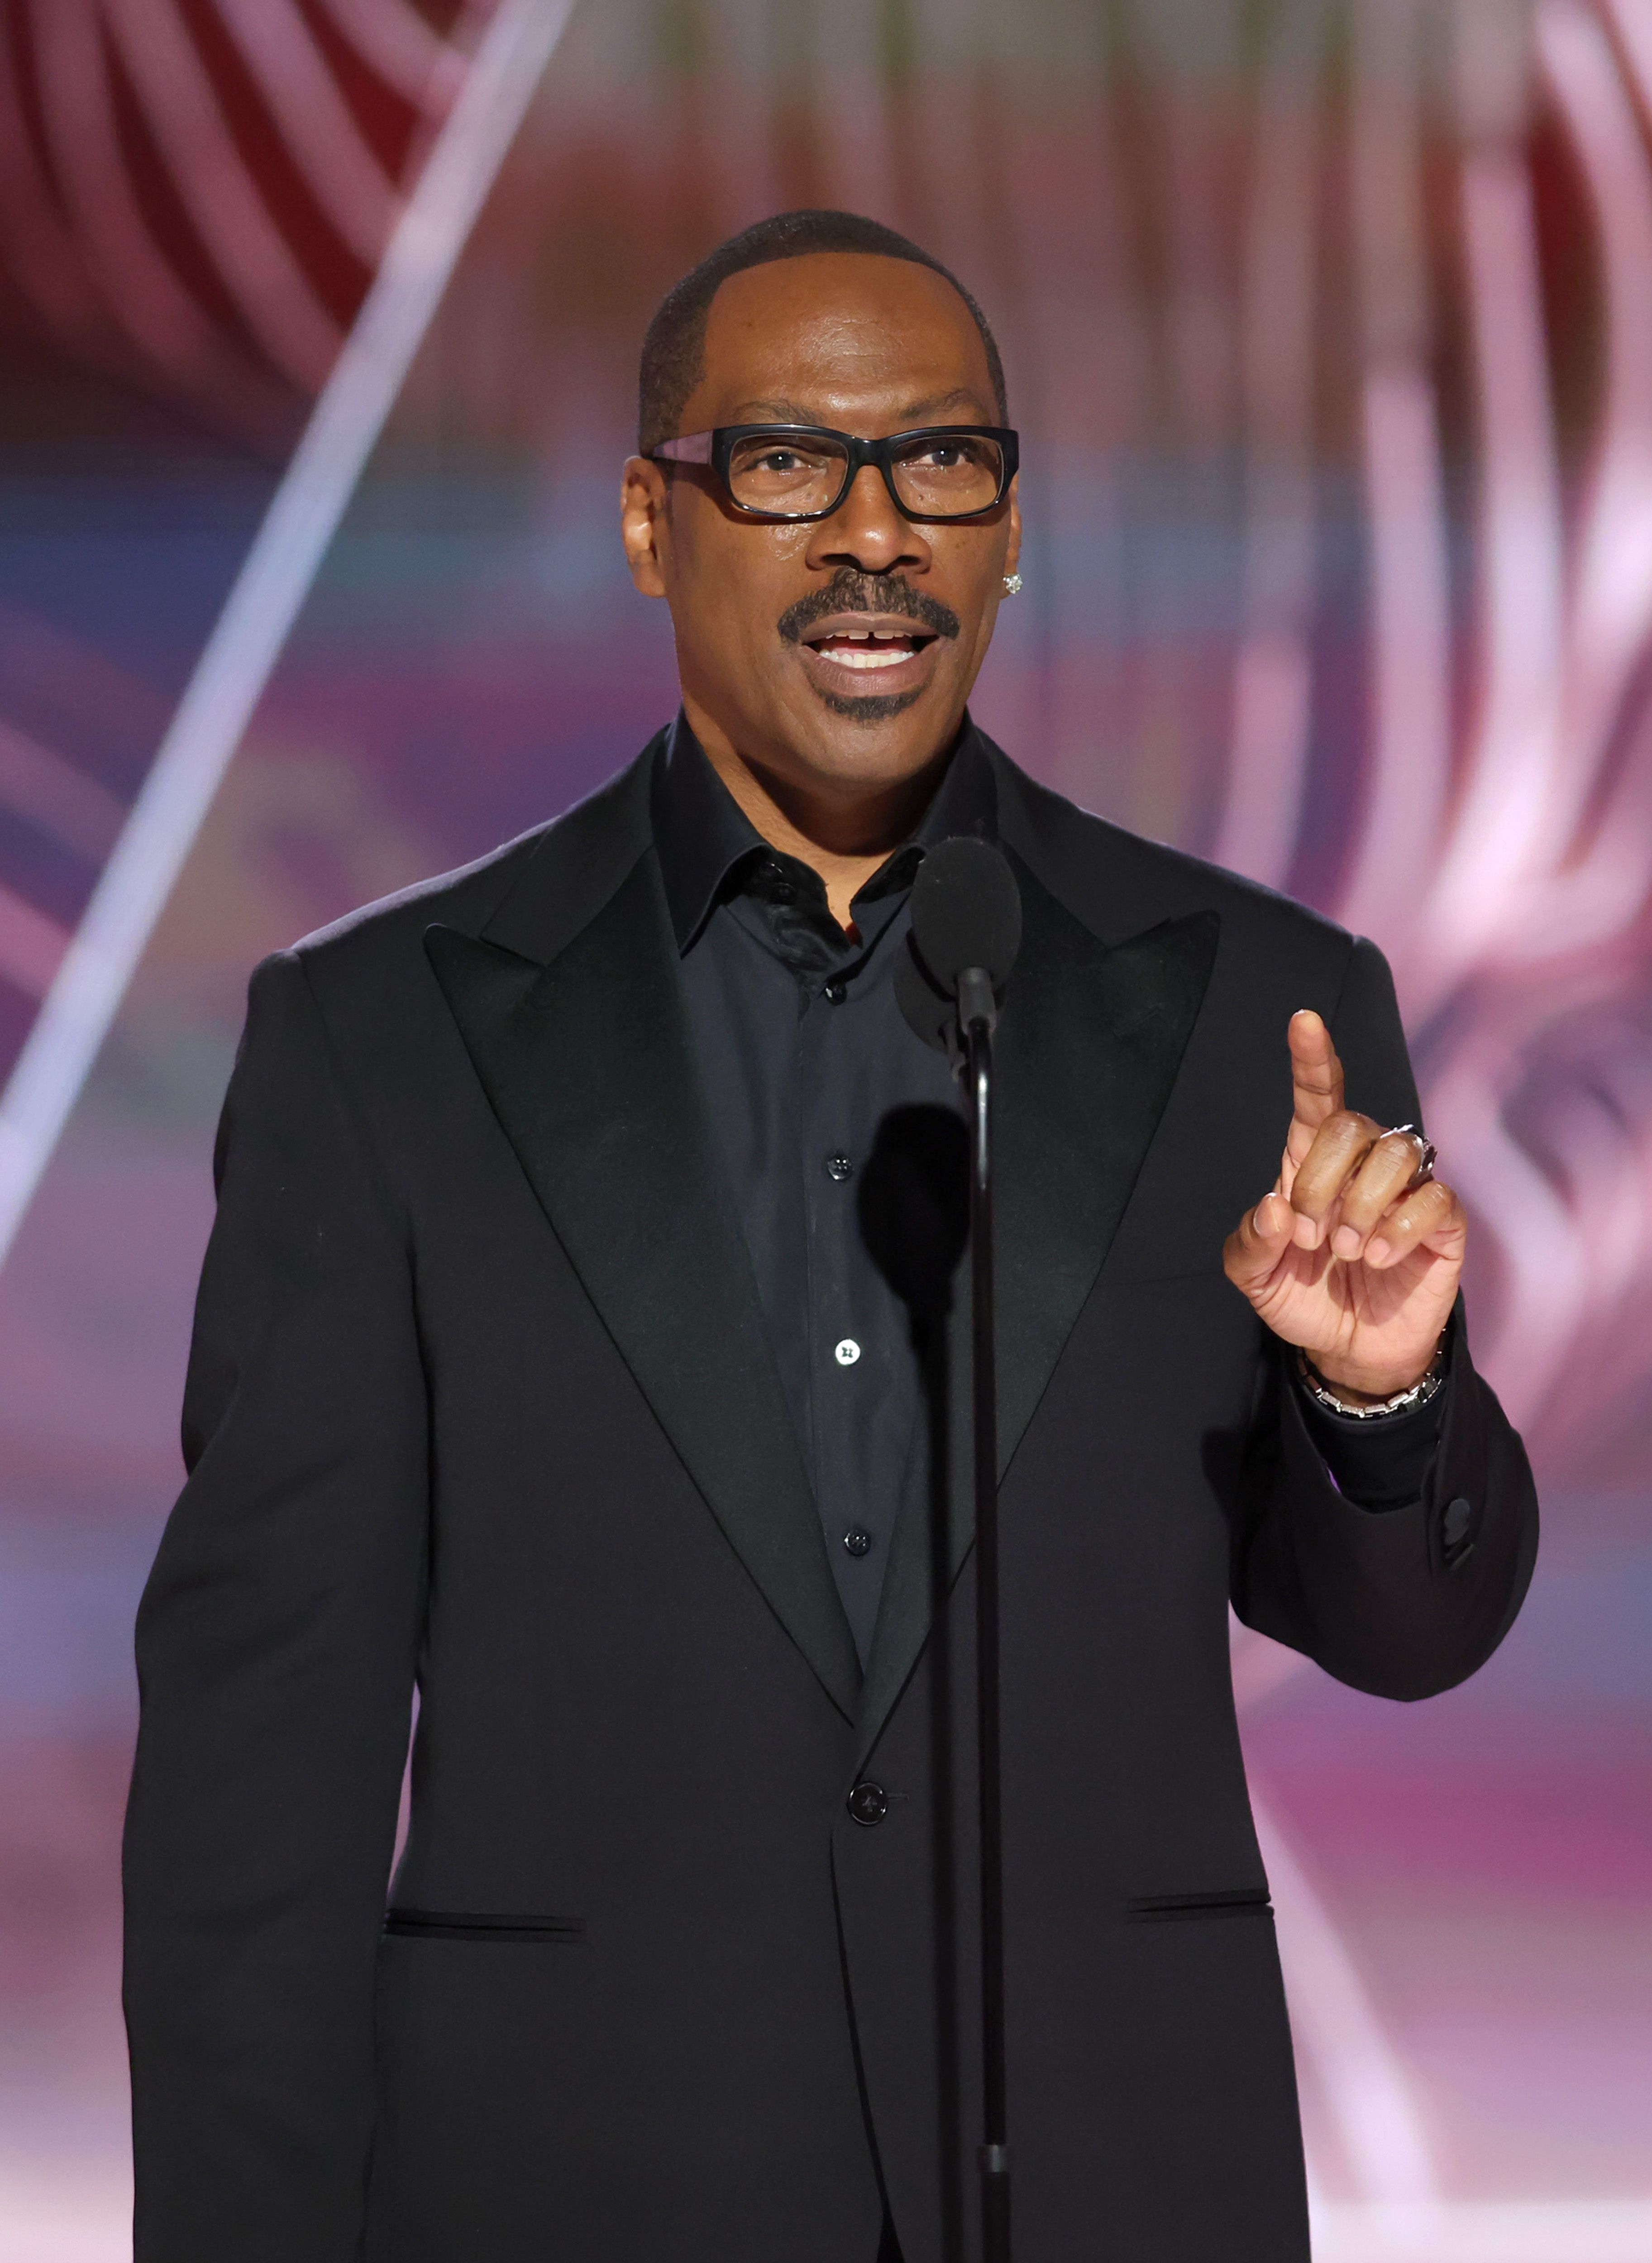 Honoree Eddie Murphy accepts the Cecil B. DeMille Award onstage at the 80th Annual Golden Globe Awards held at the Beverly Hilton Hotel on January 10, 2023 in Beverly Hills.